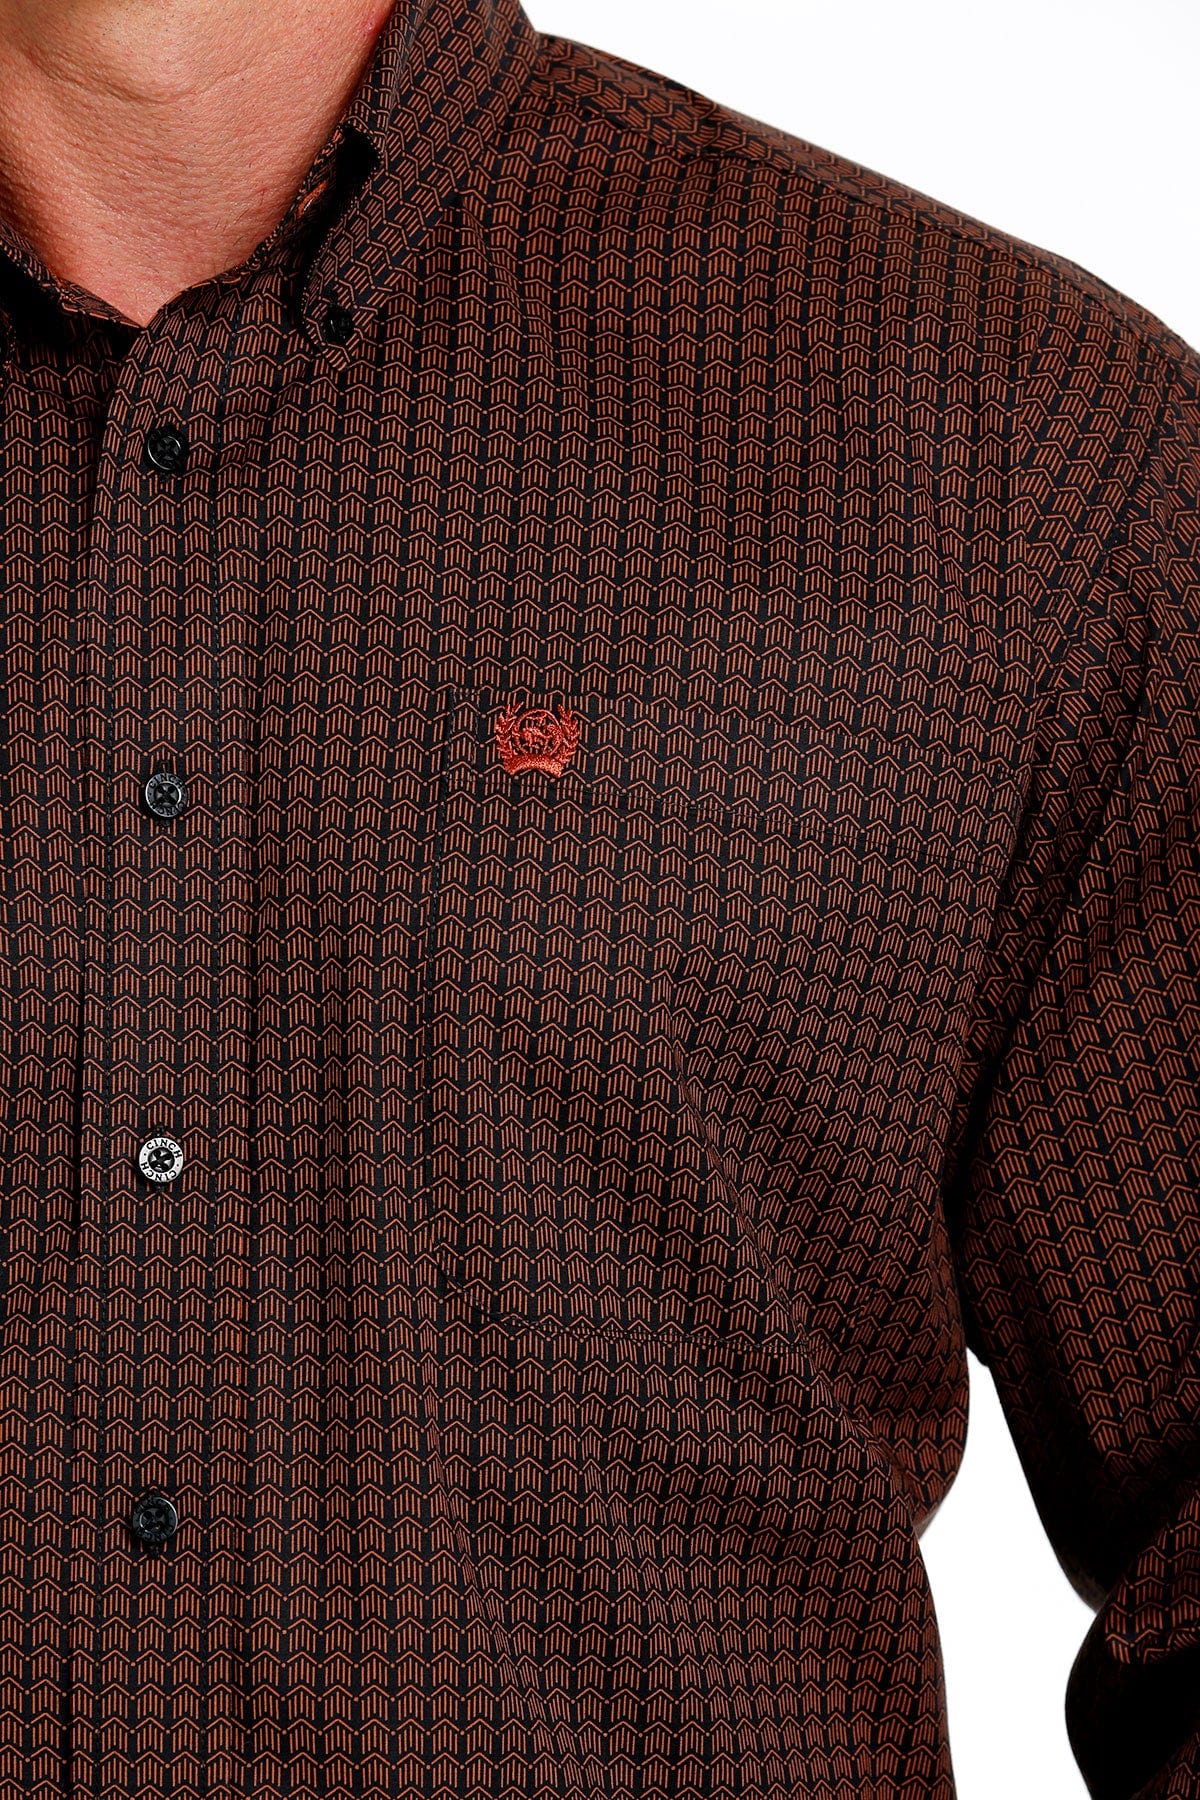 Cinch Men's Solid Brown Button Down Long Sleeve Western Shirt